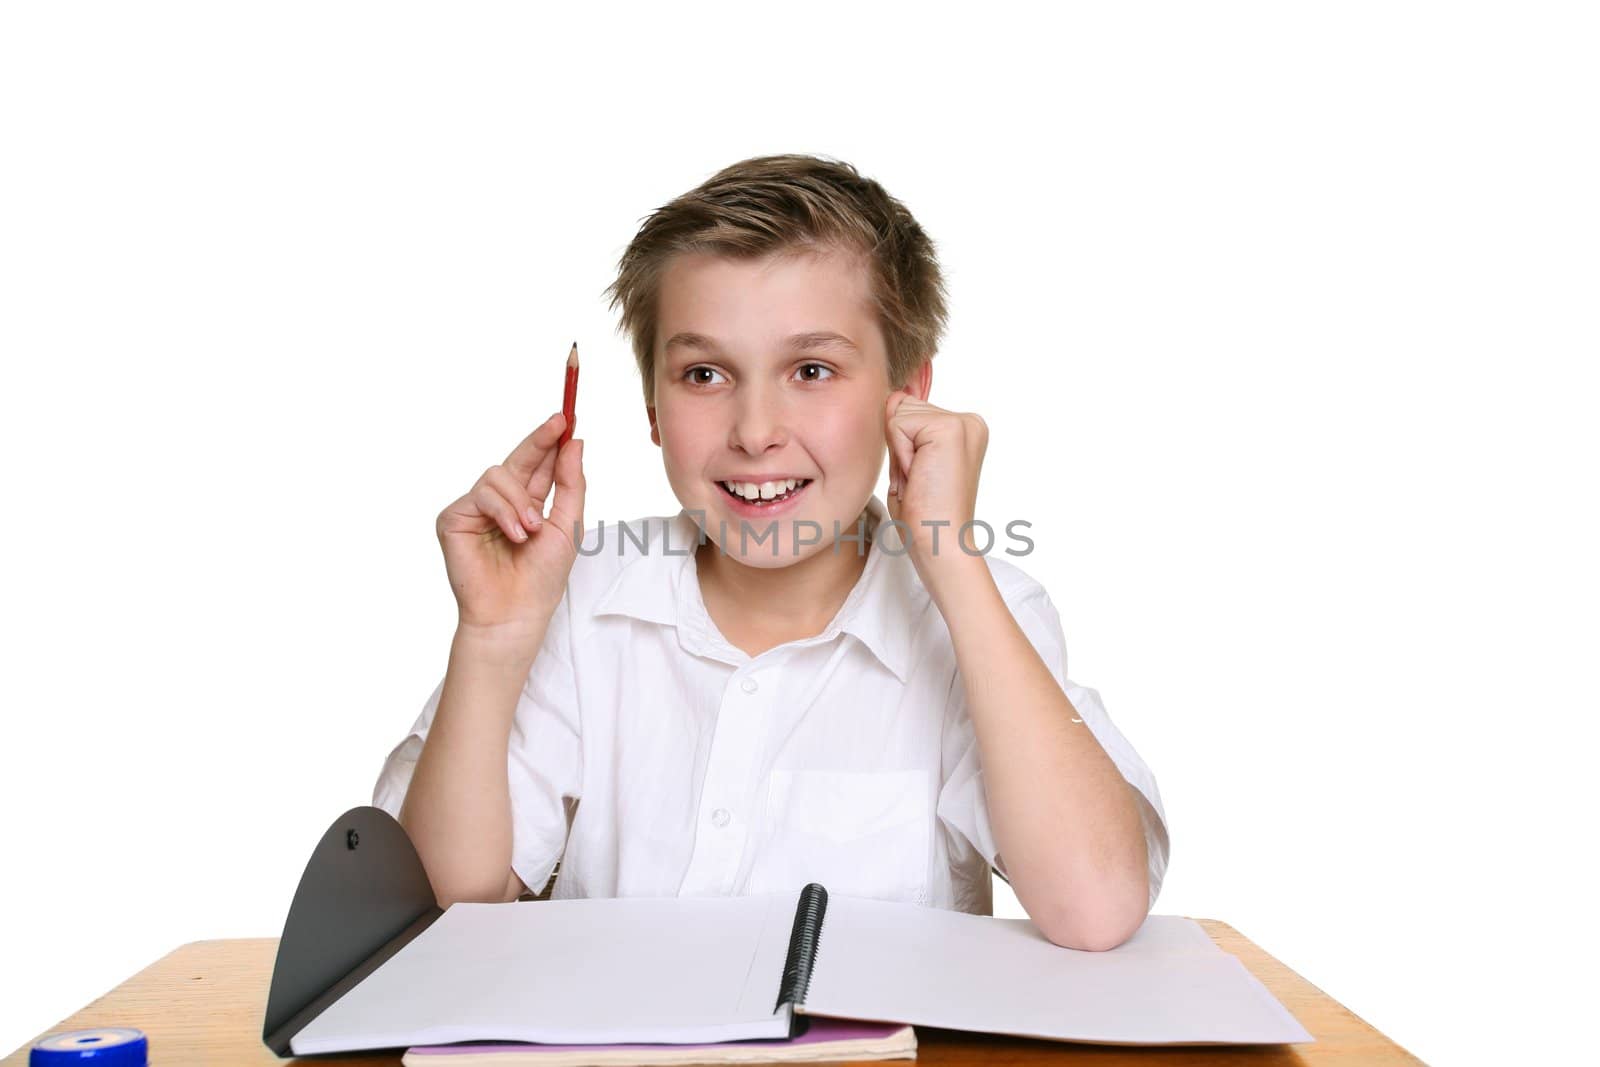 Happy school student sitting at desk with an idea or answer